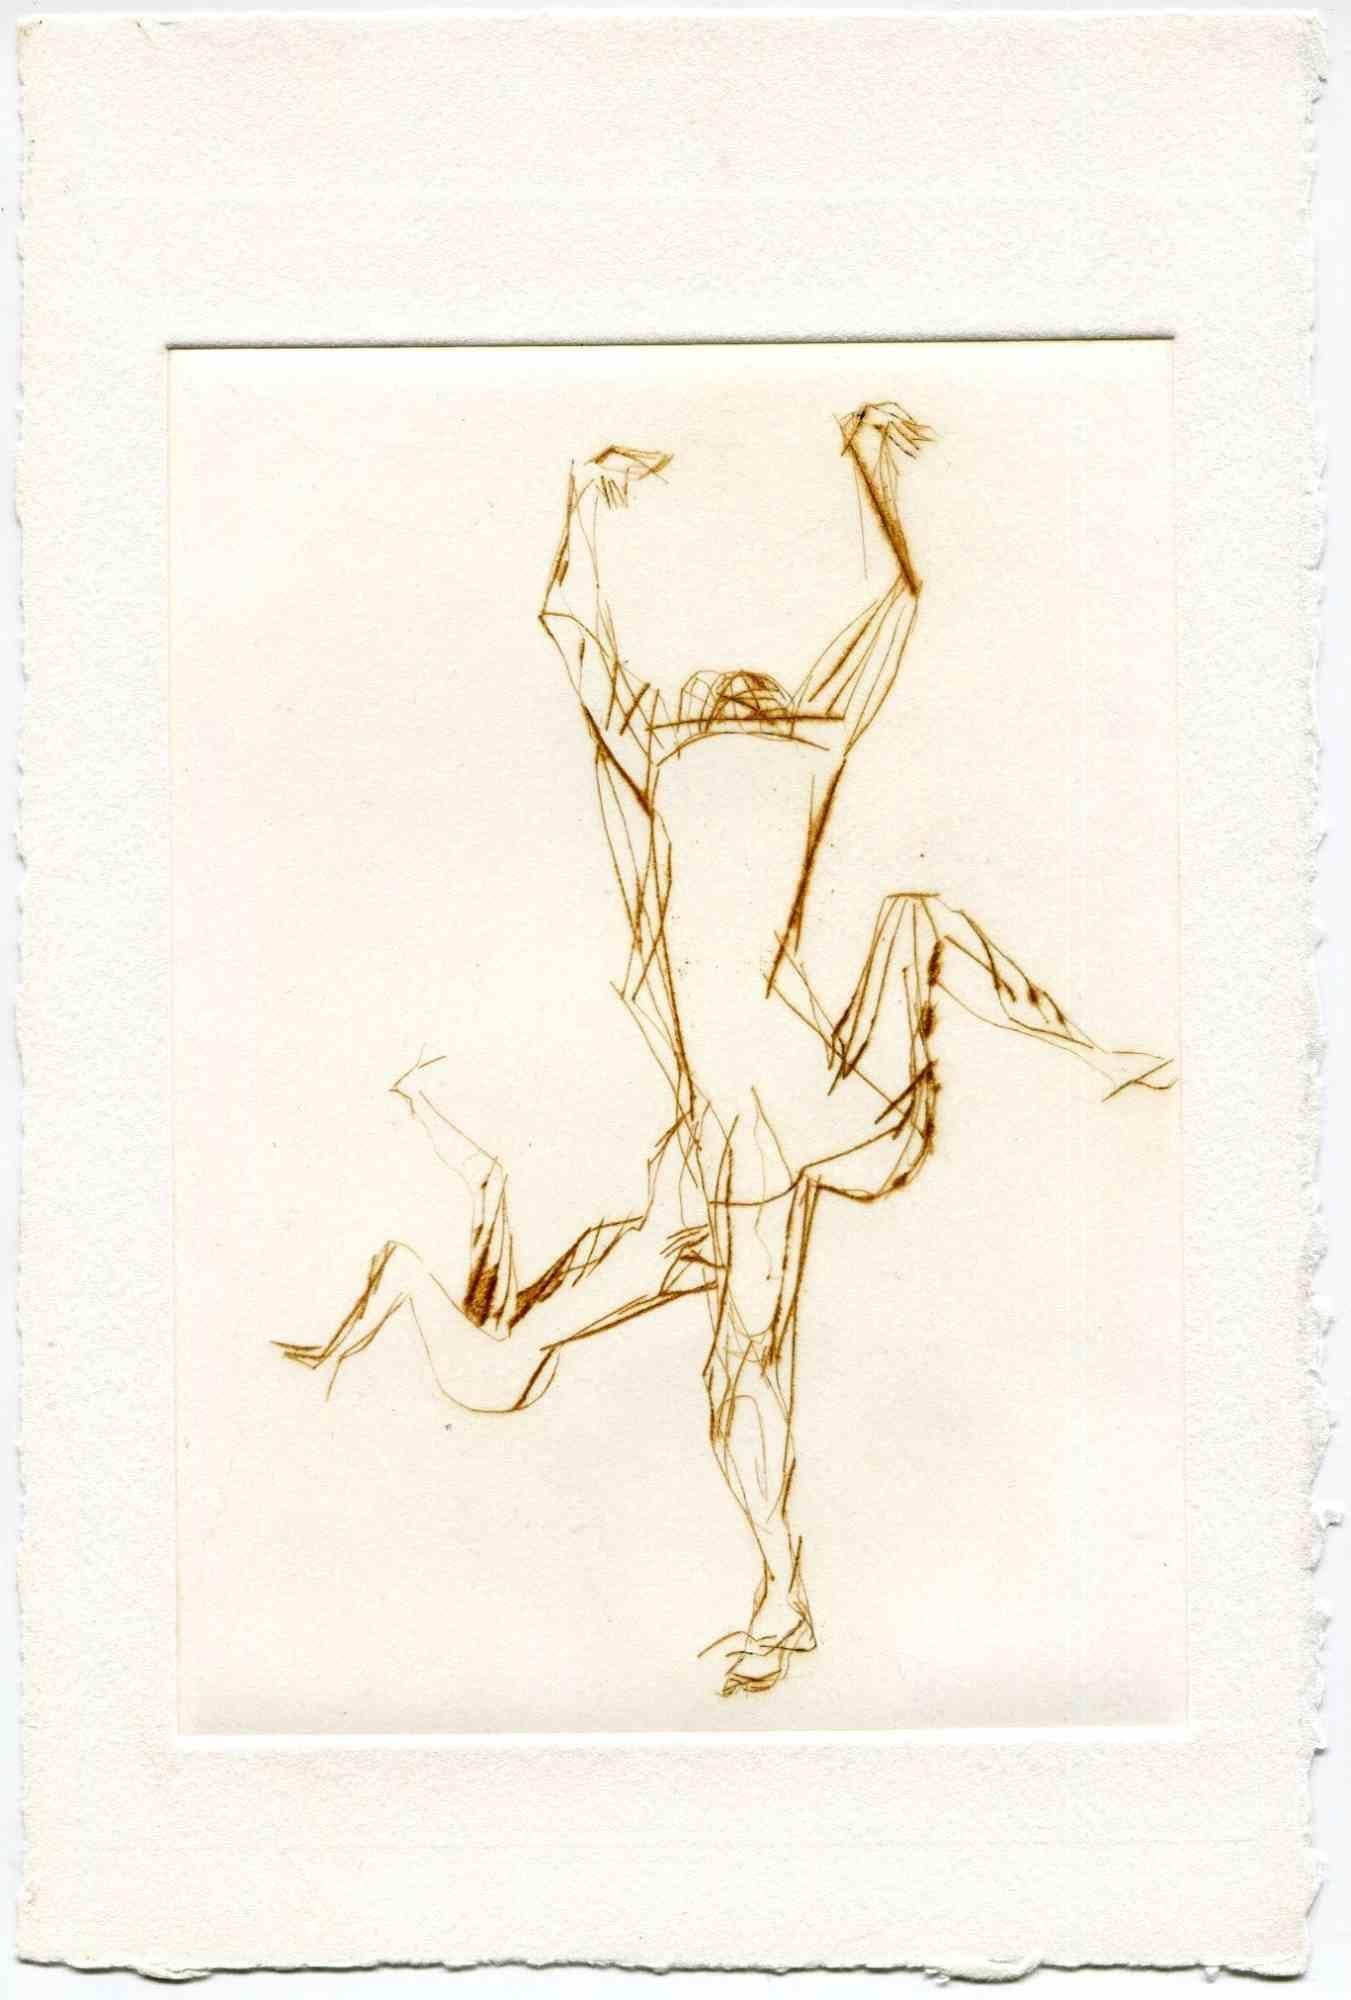 Unknown Figurative Print - Somersault - Original Etching and Drypoint - Mid-20th Century